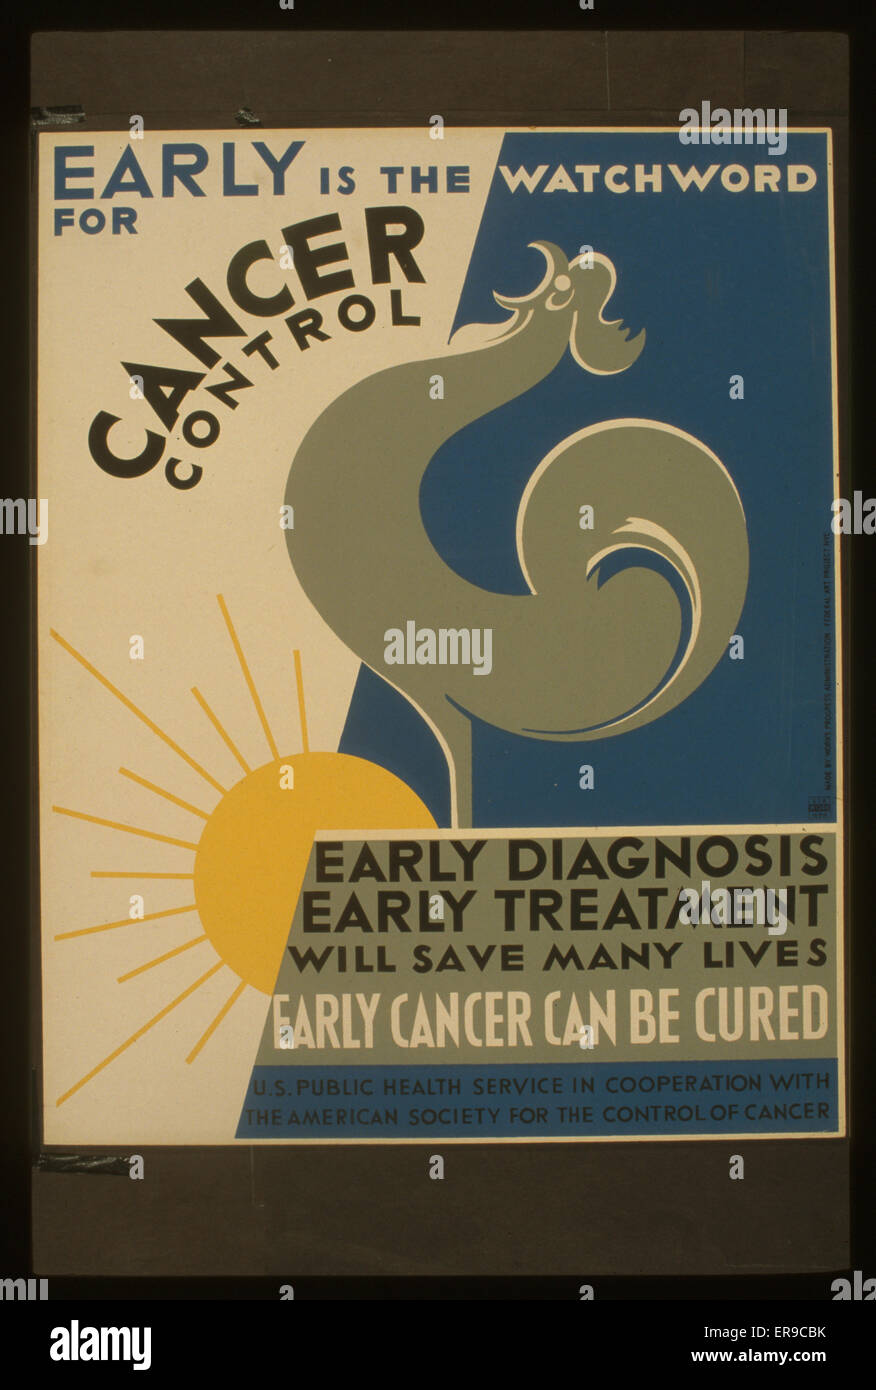 Early is the watchword for cancer control Early diagnosis, early treatment will save many lives : Early cancer can be cured. Poster promoting early diagnosis and treatment for cancer, showing a rooster crowing at sunrise. Date between 1936 and 1938. Stock Photo